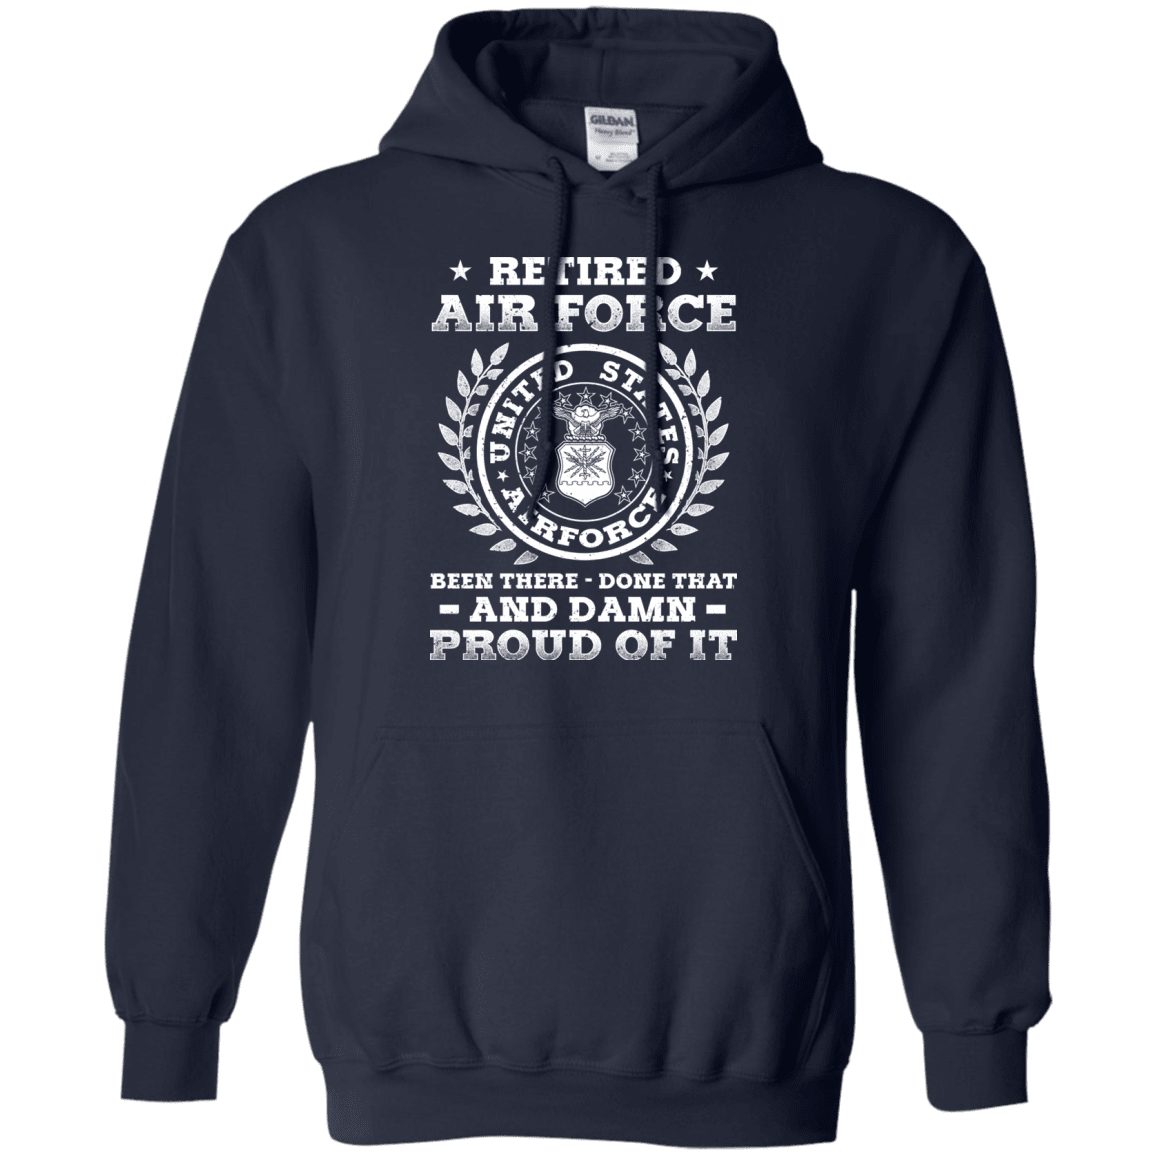 Retired Air Force Been There Done That And Damn Men Front T Shirts-TShirt-USAF-Veterans Nation